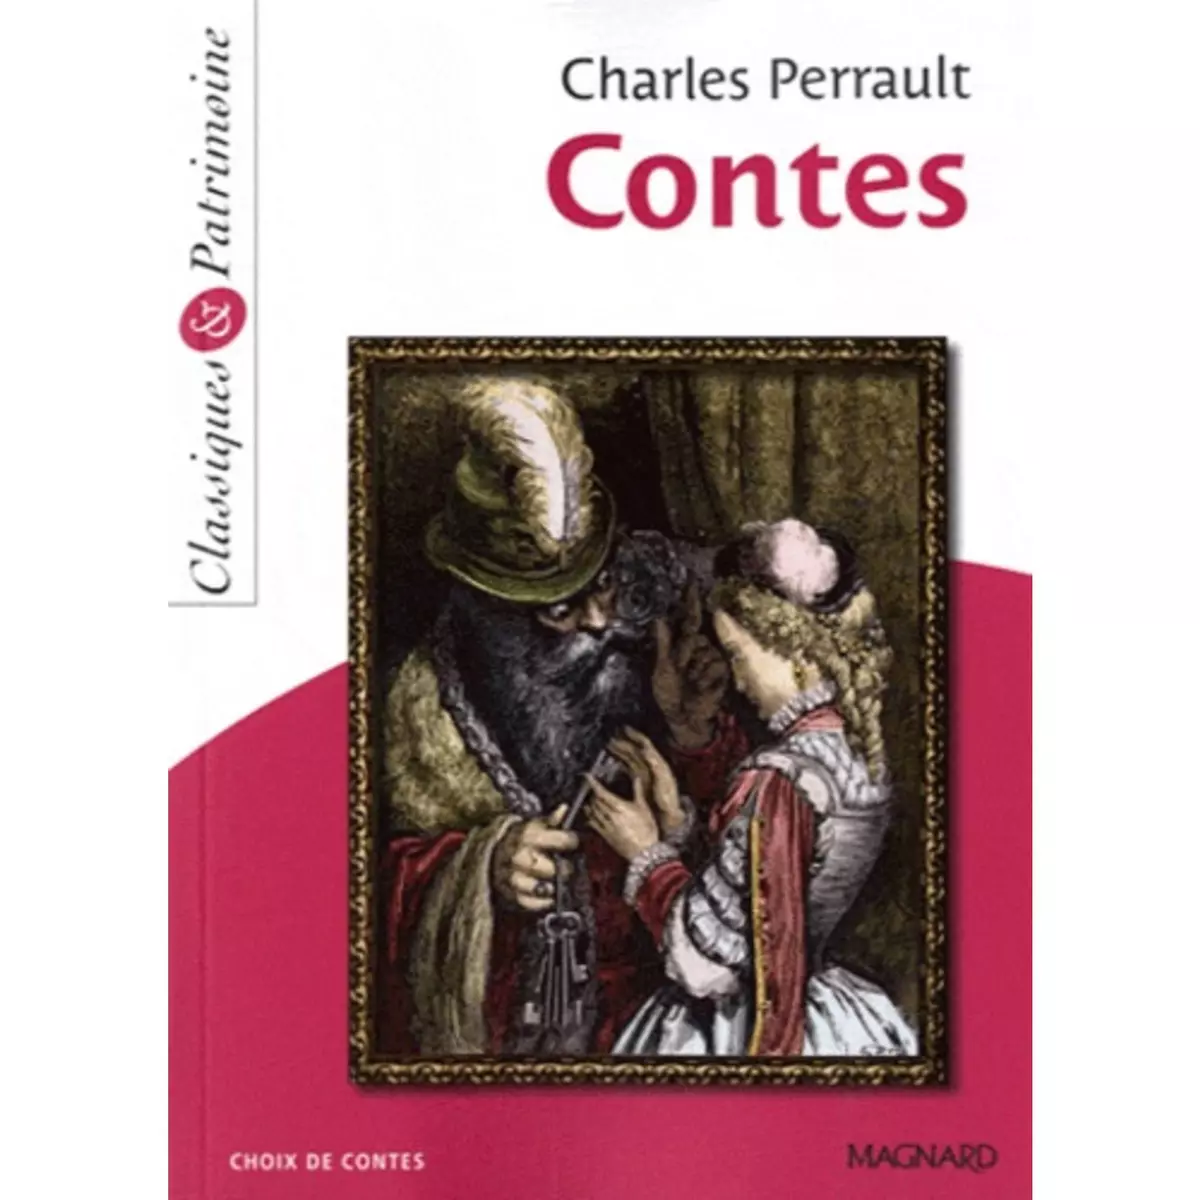  CONTES, Perrault Charles